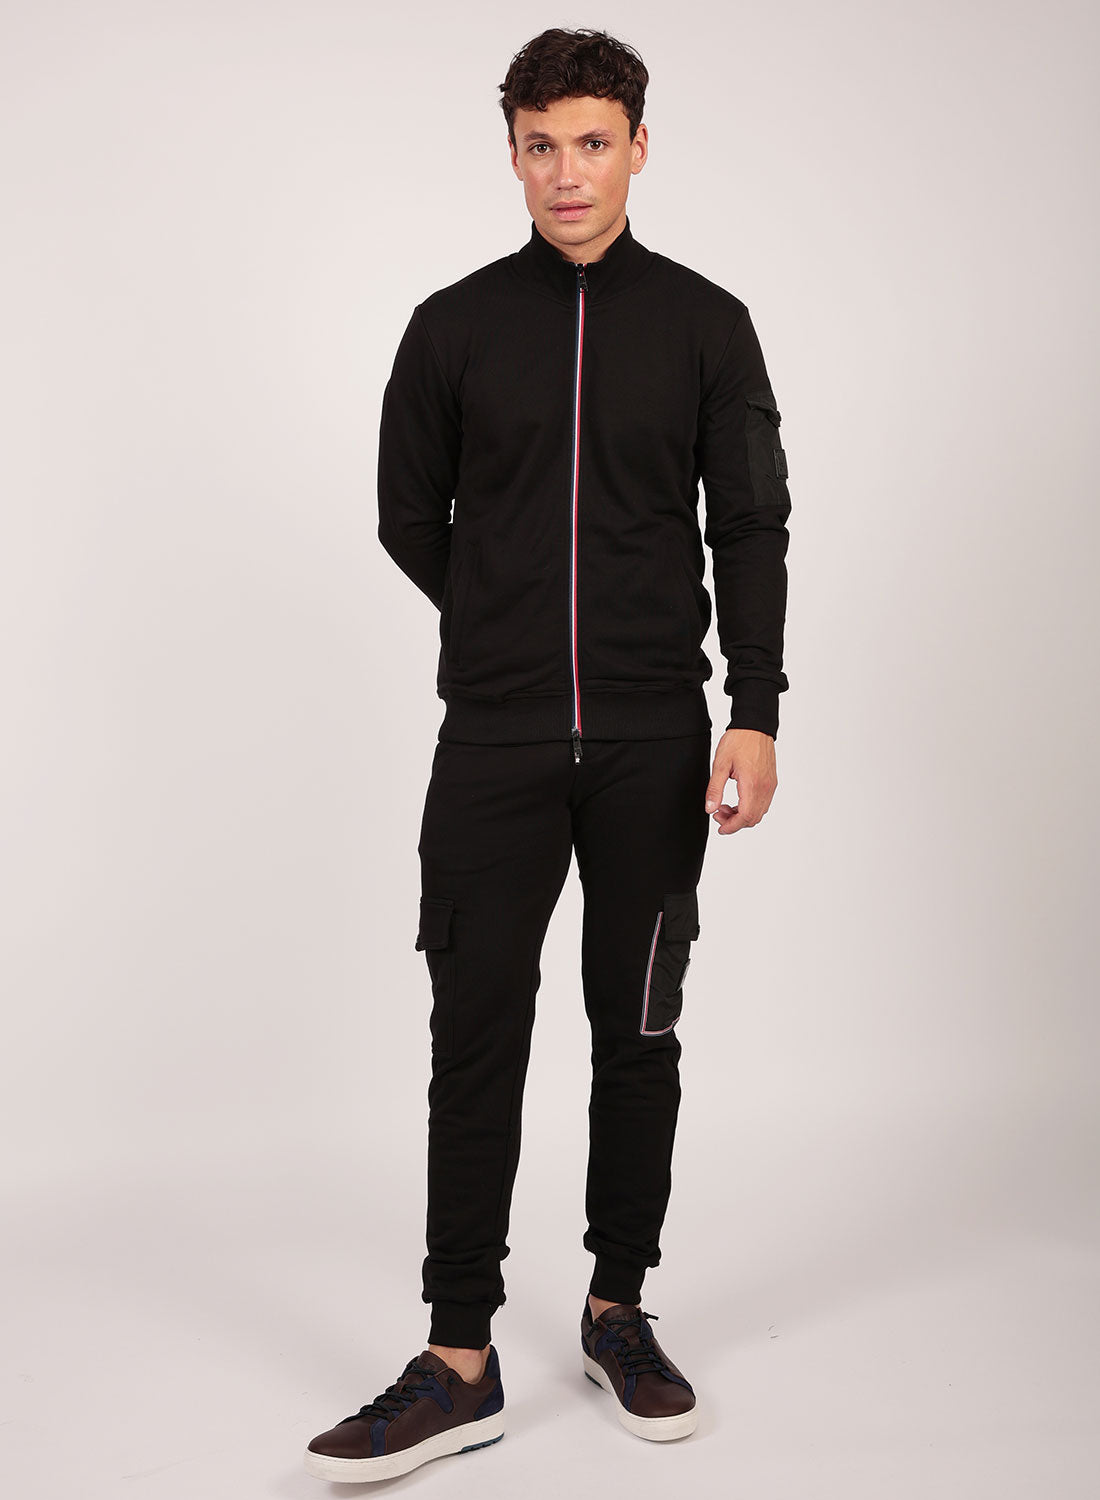 BLK RBR Tracksuit – The Wolf London Fashion